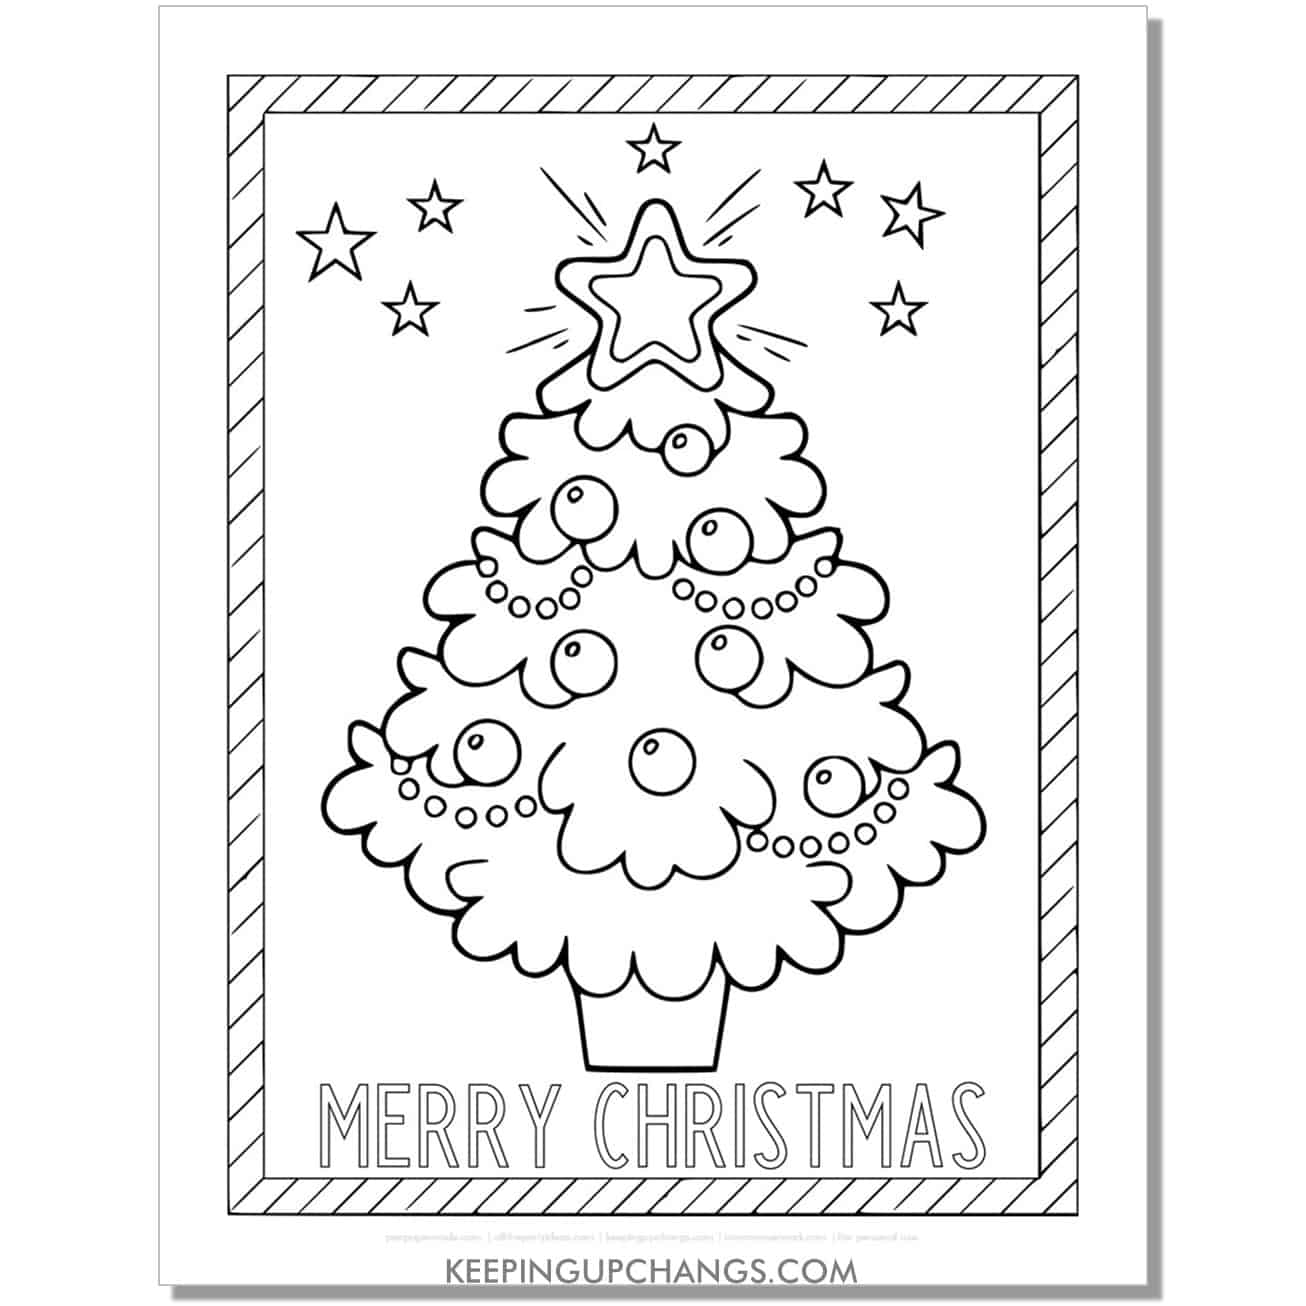 https://keepingupchangs.com/wp-content/uploads/free-full-size-merry-christmas-tree-coloring-page-colouring-sheet.jpg